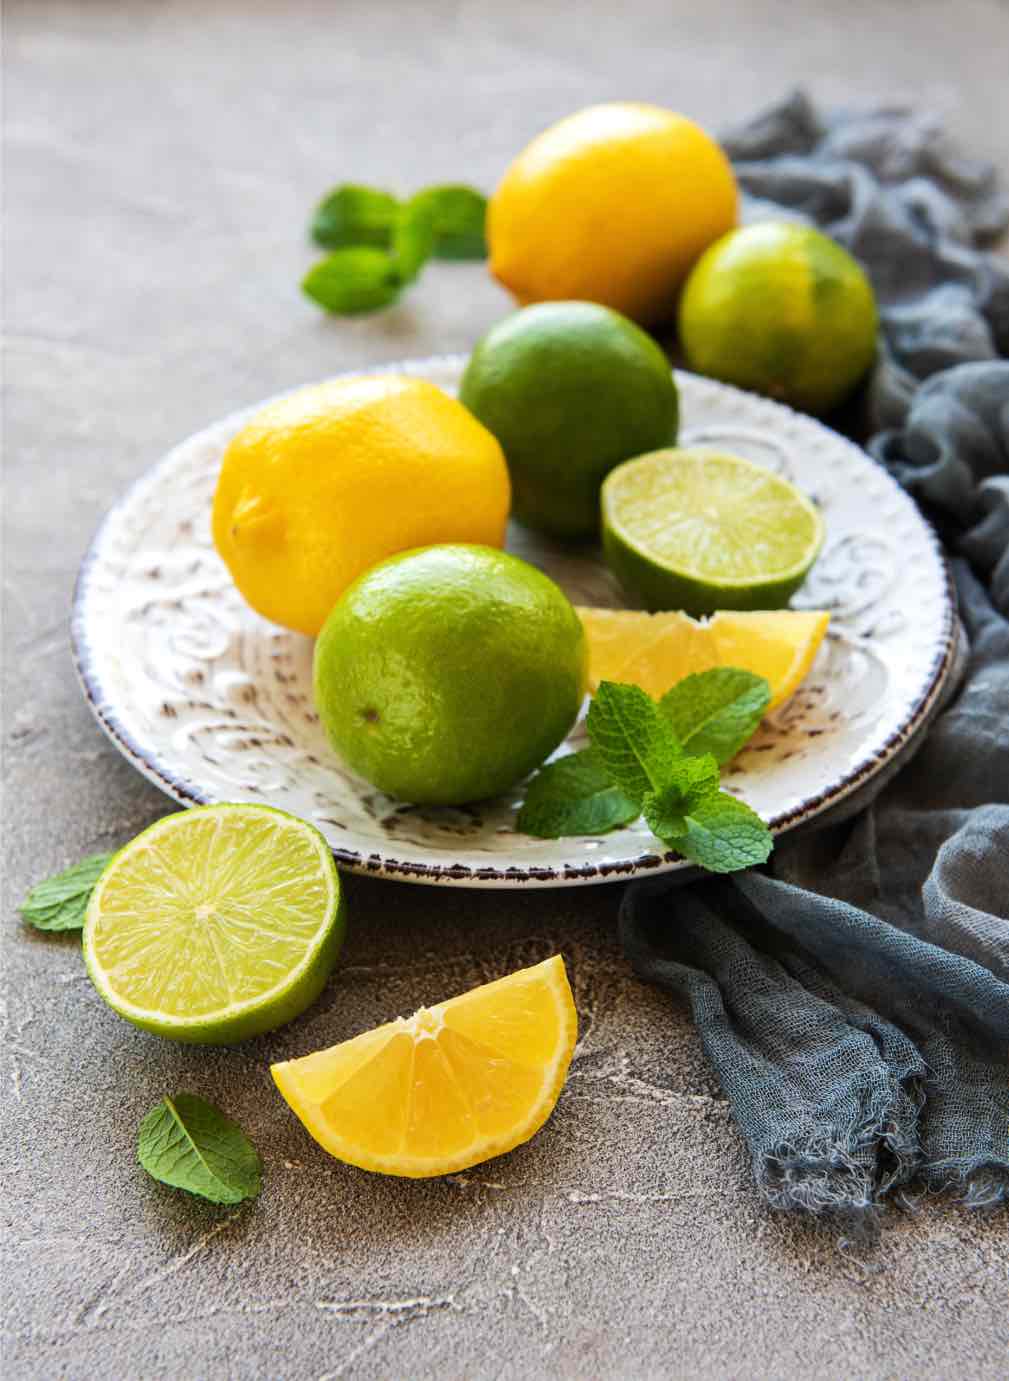 Lemons and limes are great for humans, but not for dogs - learn more with Dog Training Elite Southeast Louisiana!